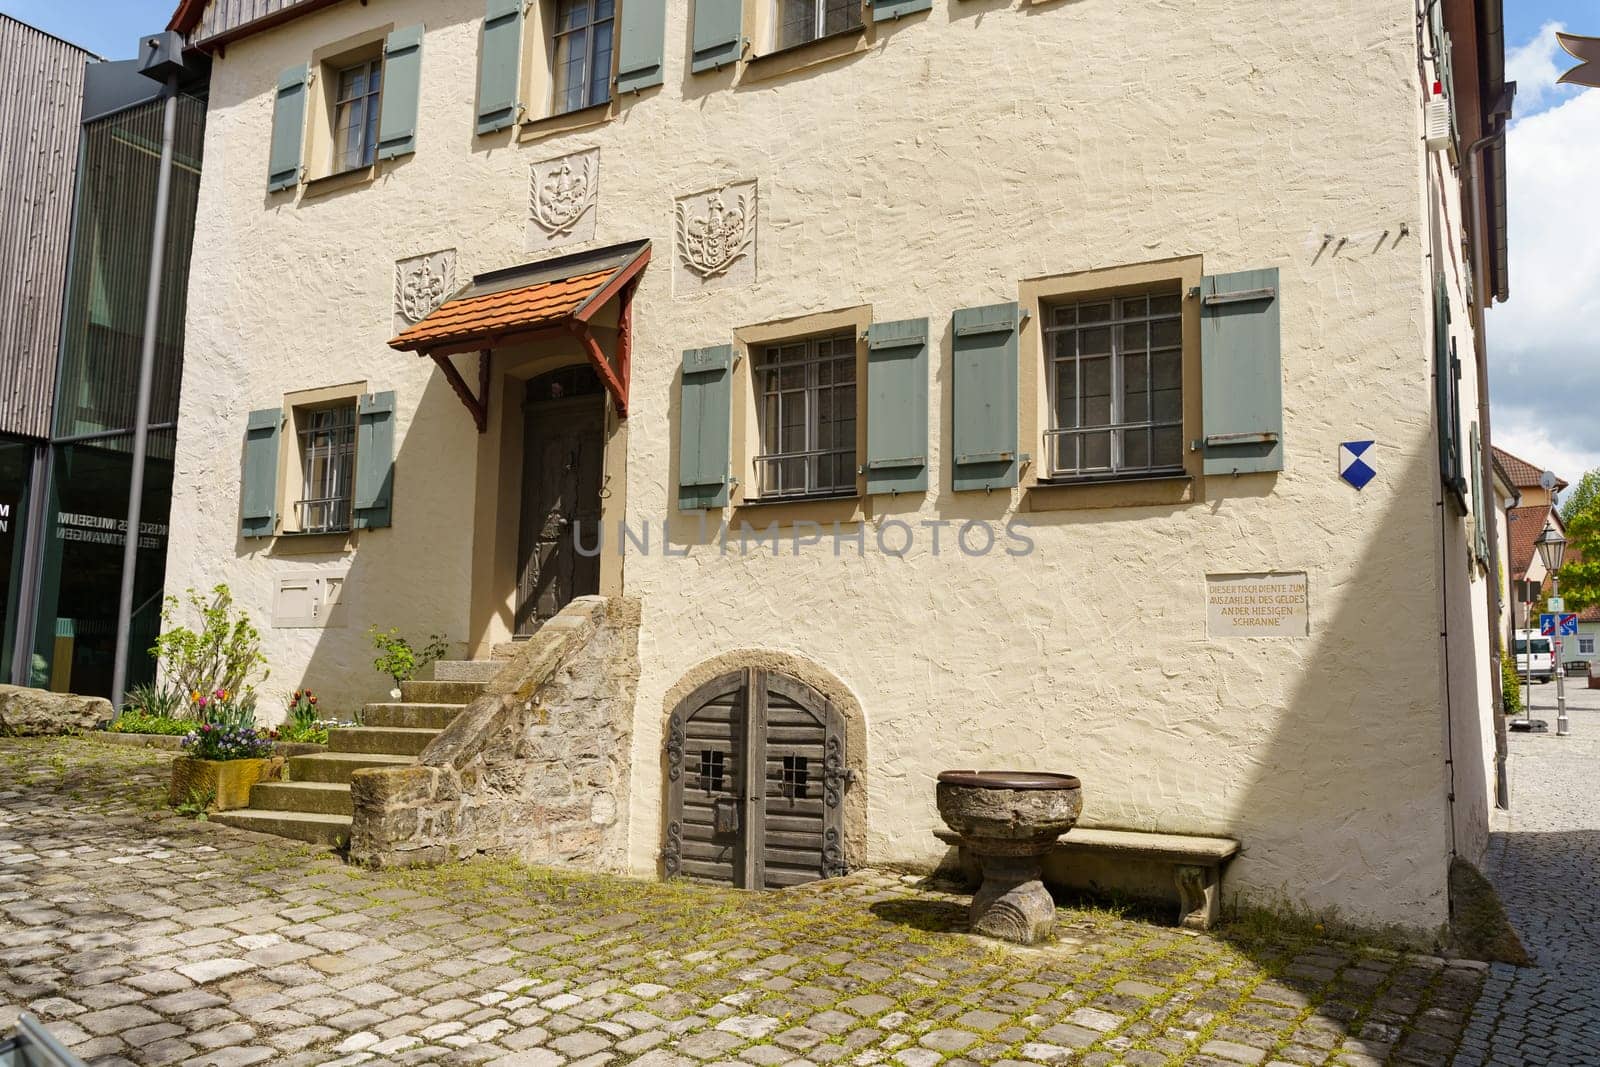 Feuchtwangen, Germany - June 6, 2023: A white-washed building with wooden doors and stone steps, located in a cobblestone courtyard in Germany.